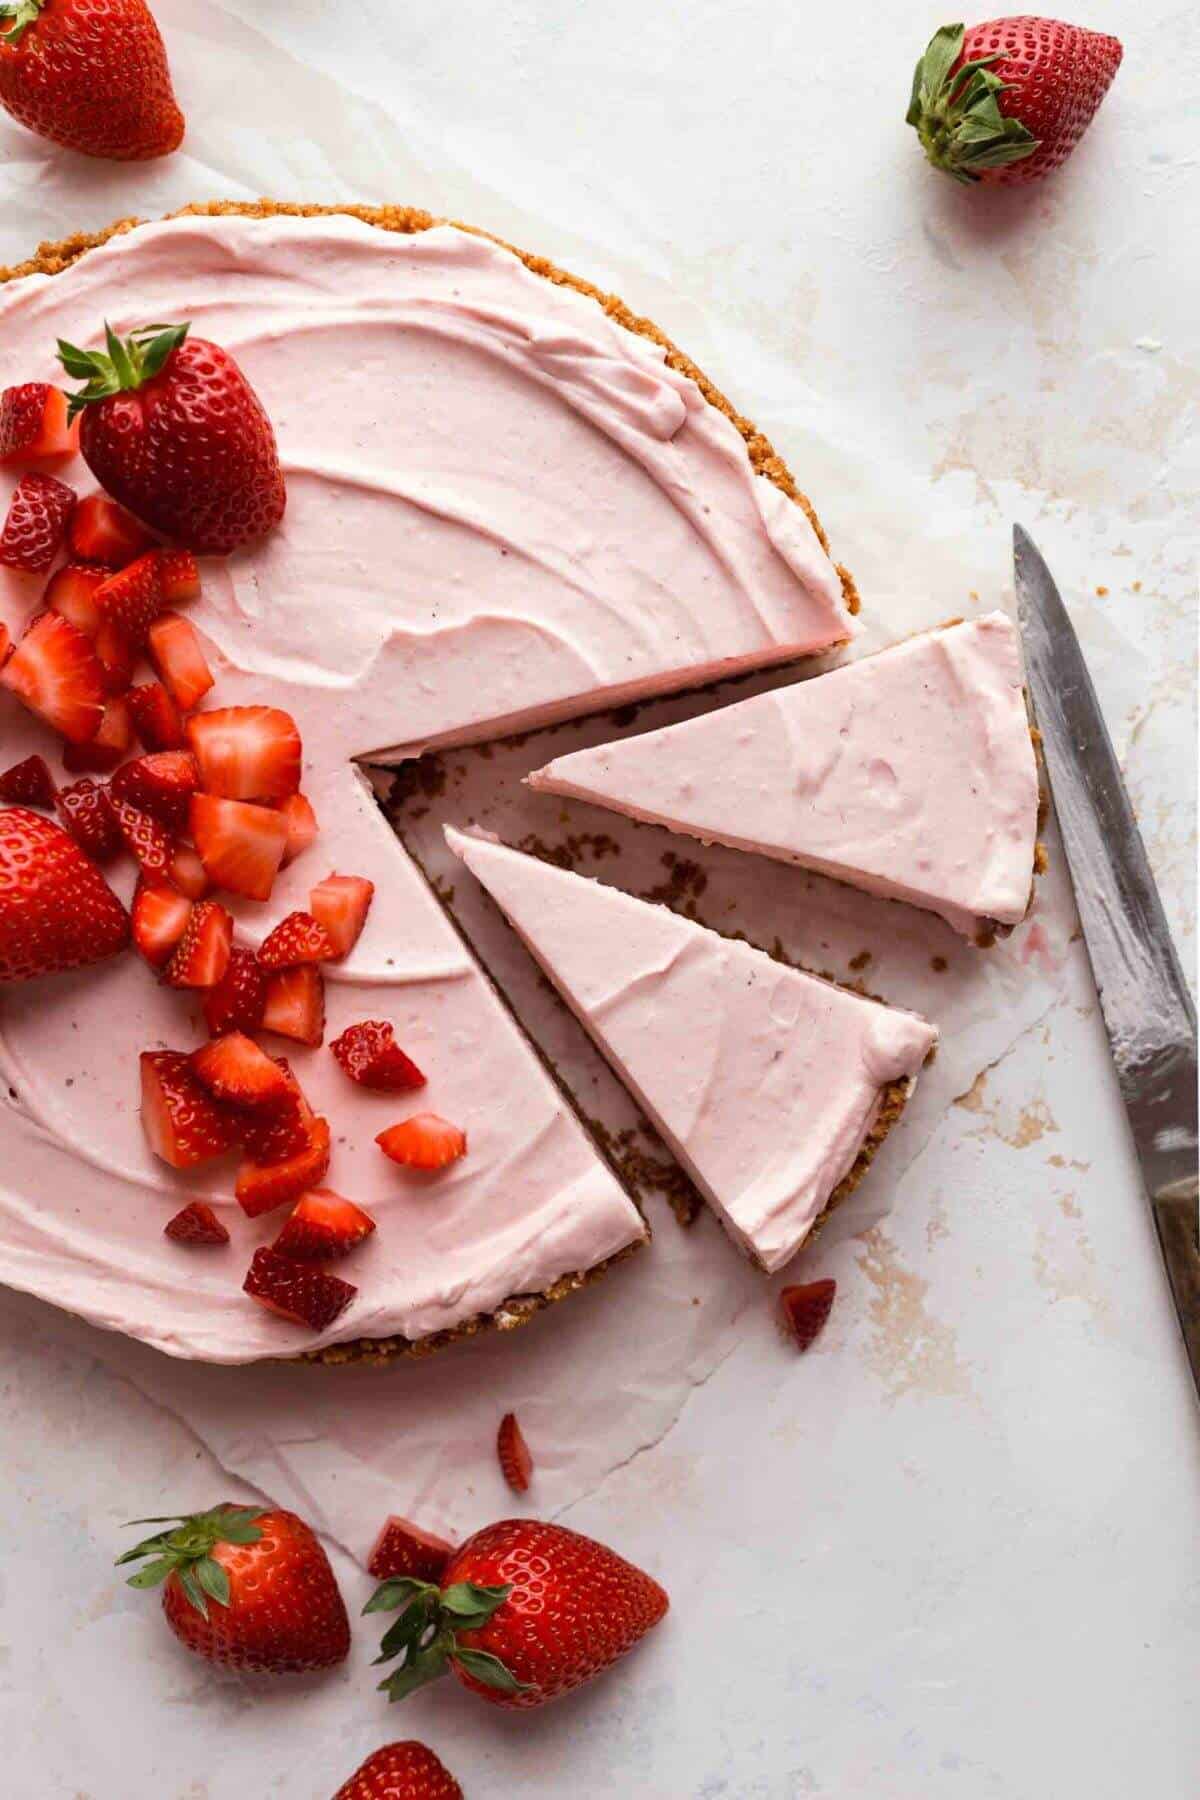 strawberry cheesecake with two slices cut out and strawberries on top